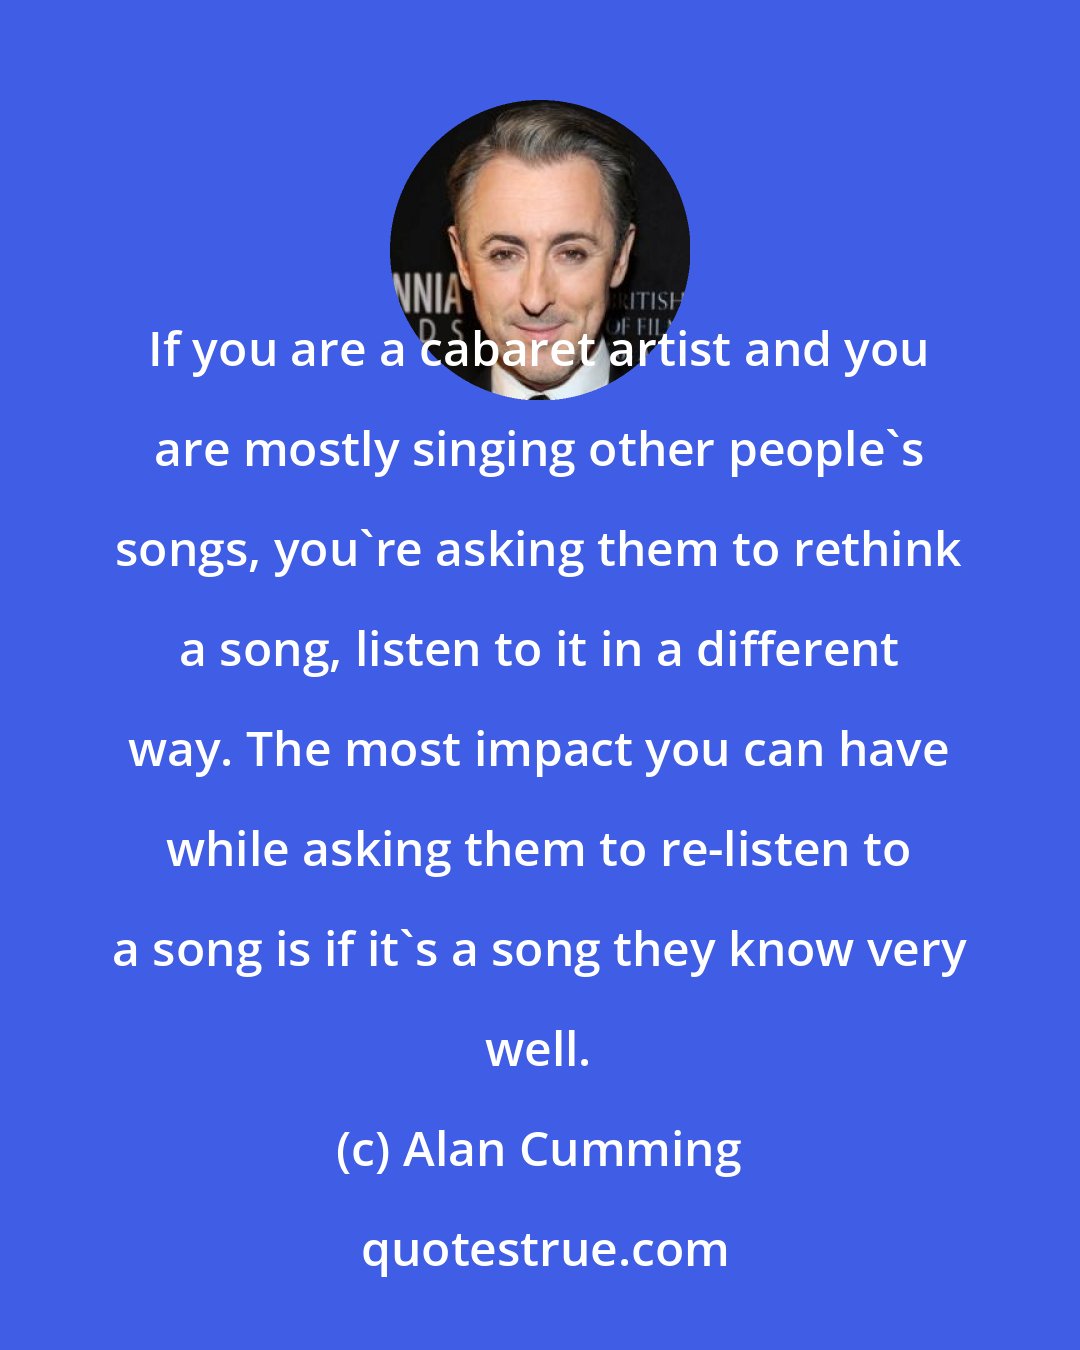 Alan Cumming: If you are a cabaret artist and you are mostly singing other people's songs, you're asking them to rethink a song, listen to it in a different way. The most impact you can have while asking them to re-listen to a song is if it's a song they know very well.